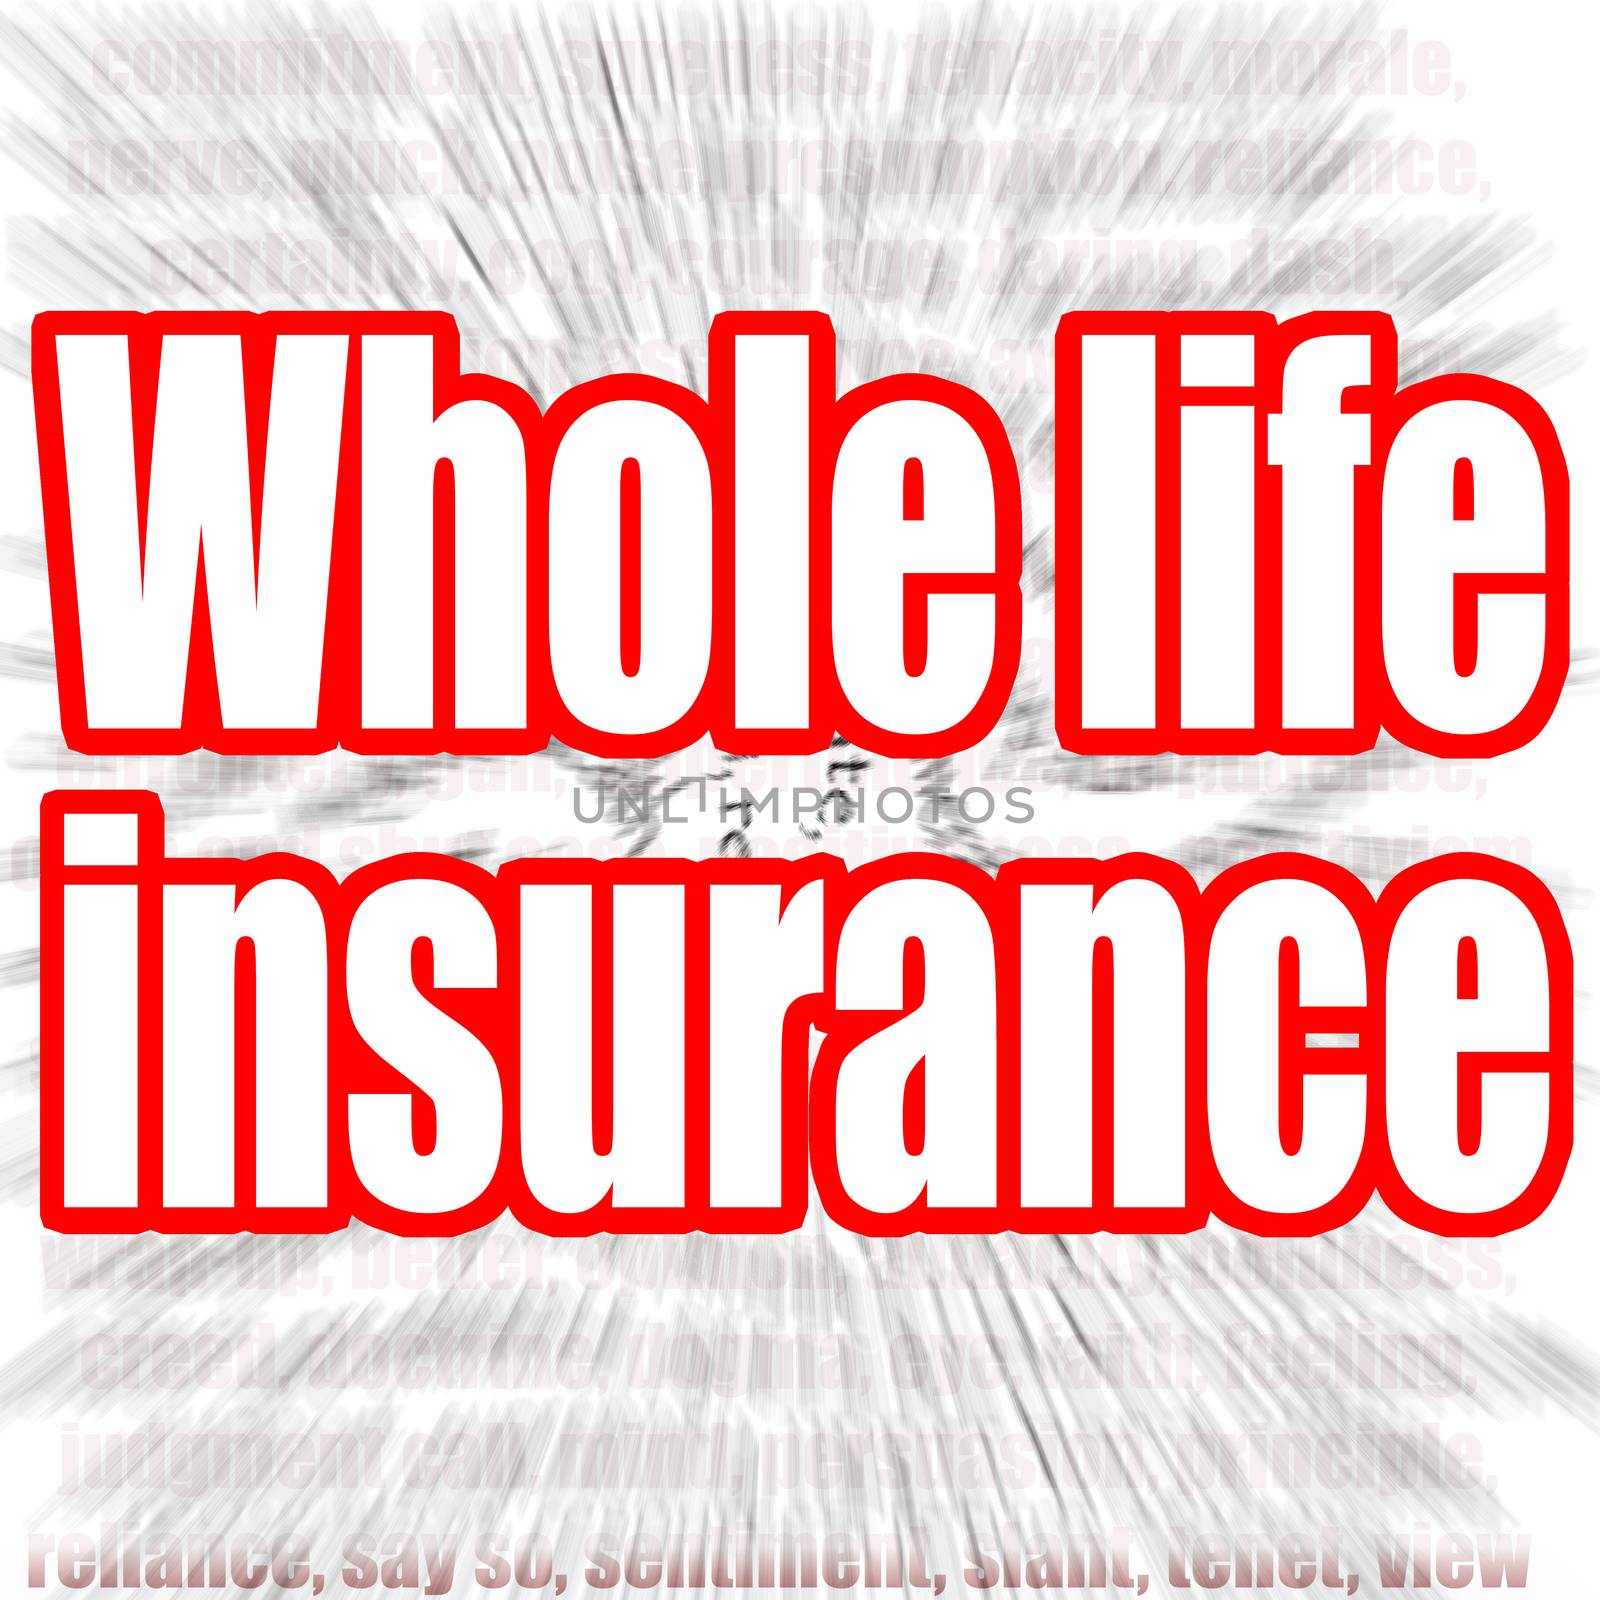 Whole life insurance word with zoom in effect as background by tang90246